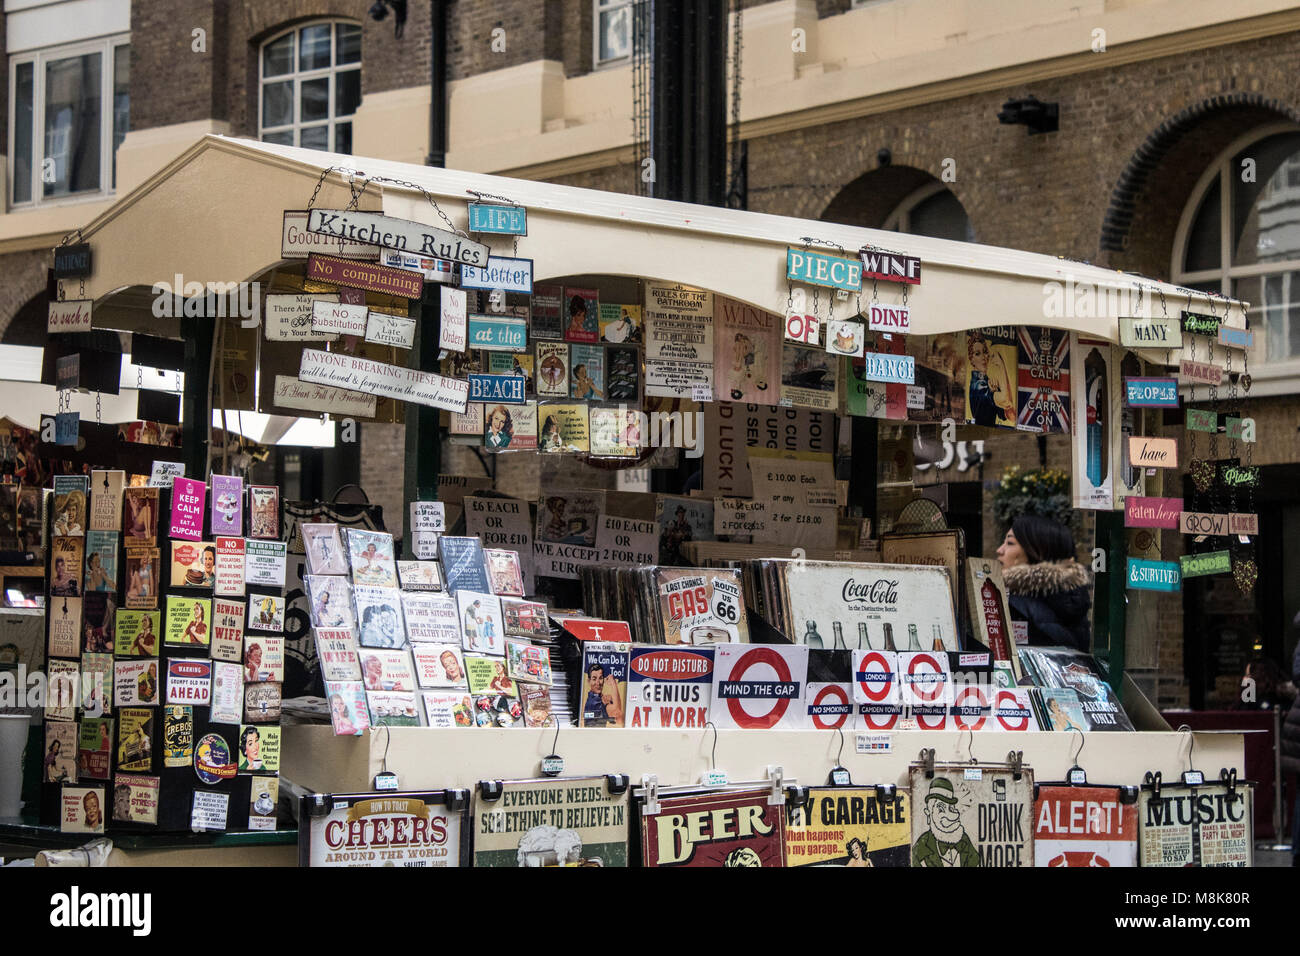 signs at hays galleria in london featuring shops, restaurants, cafe's and bars with stalls of gifts Stock Photo